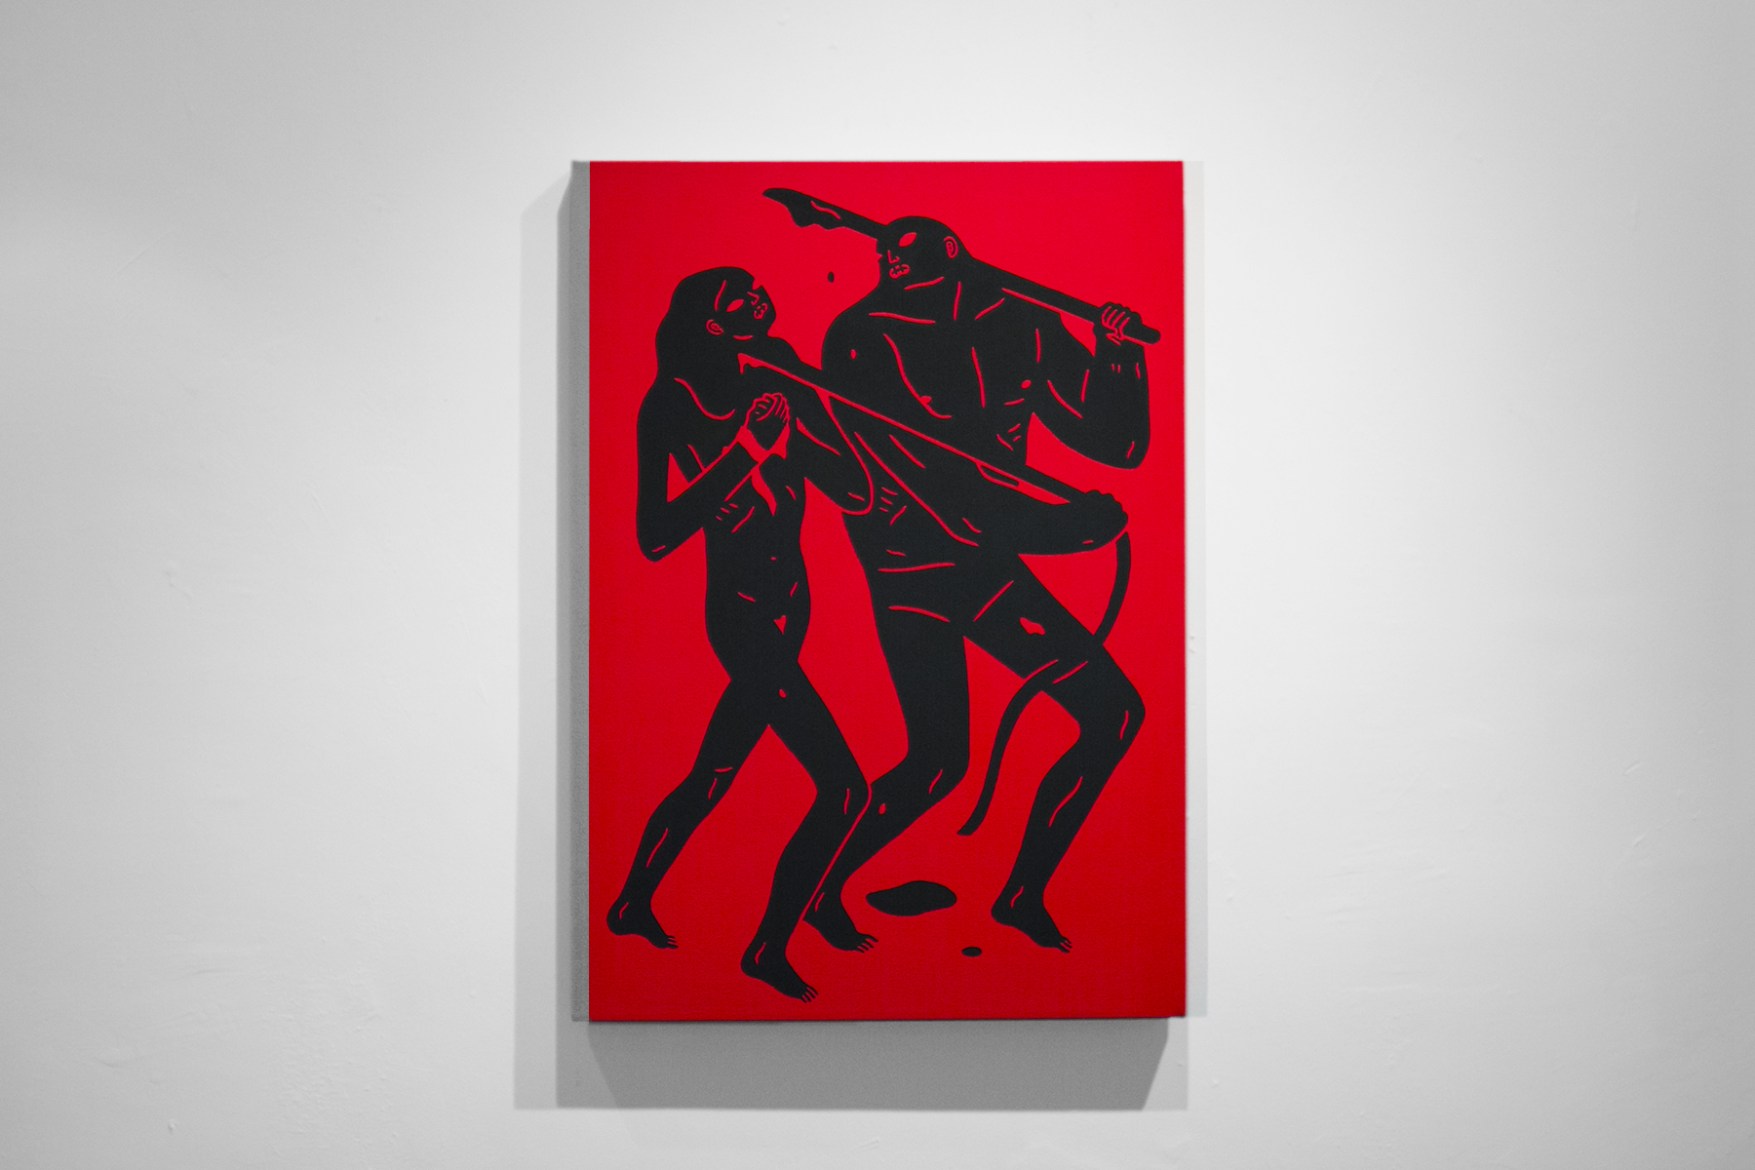 cleon-peterson-8